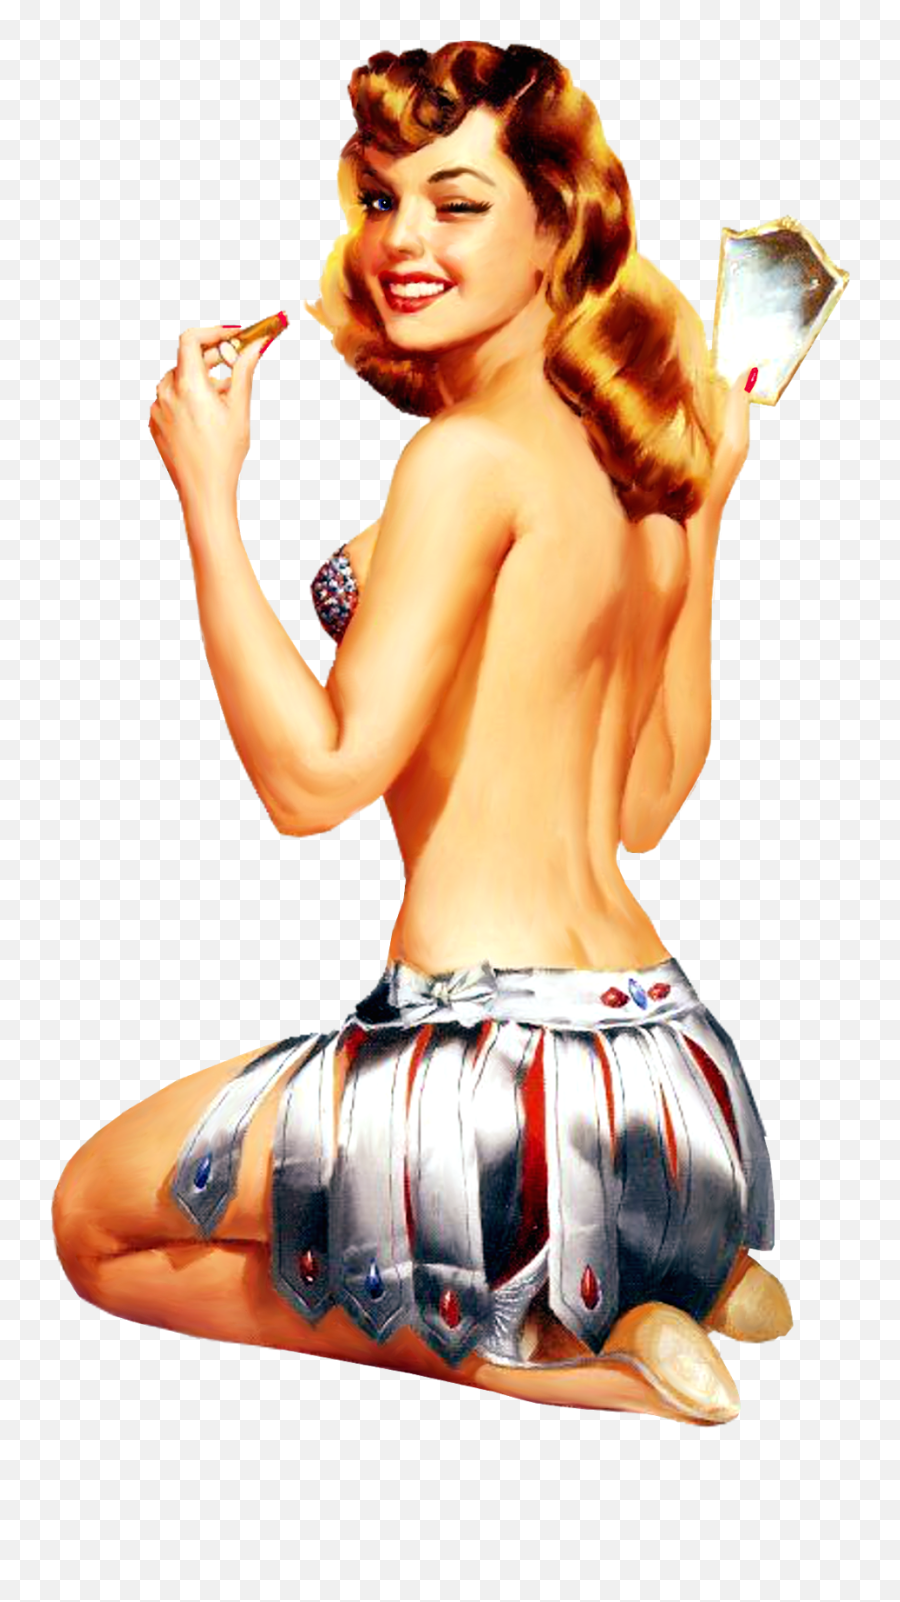 Download Pin Up Retro Png Image With No Background - Girls Pin Up Vintage,Pin Up Girl Png